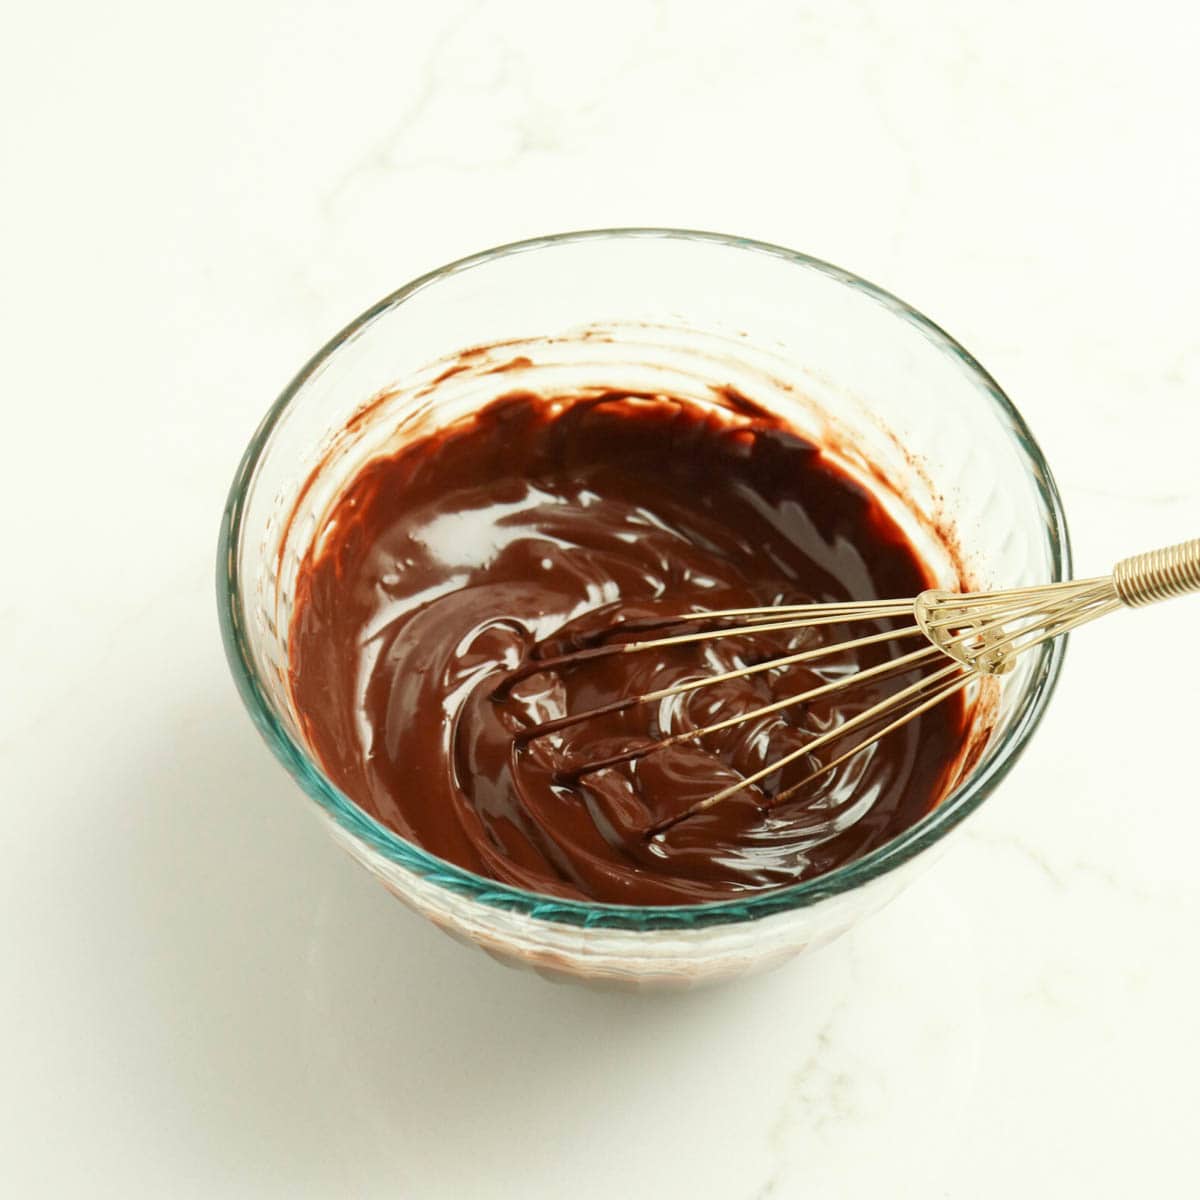 Whisked ganache in a bowl.